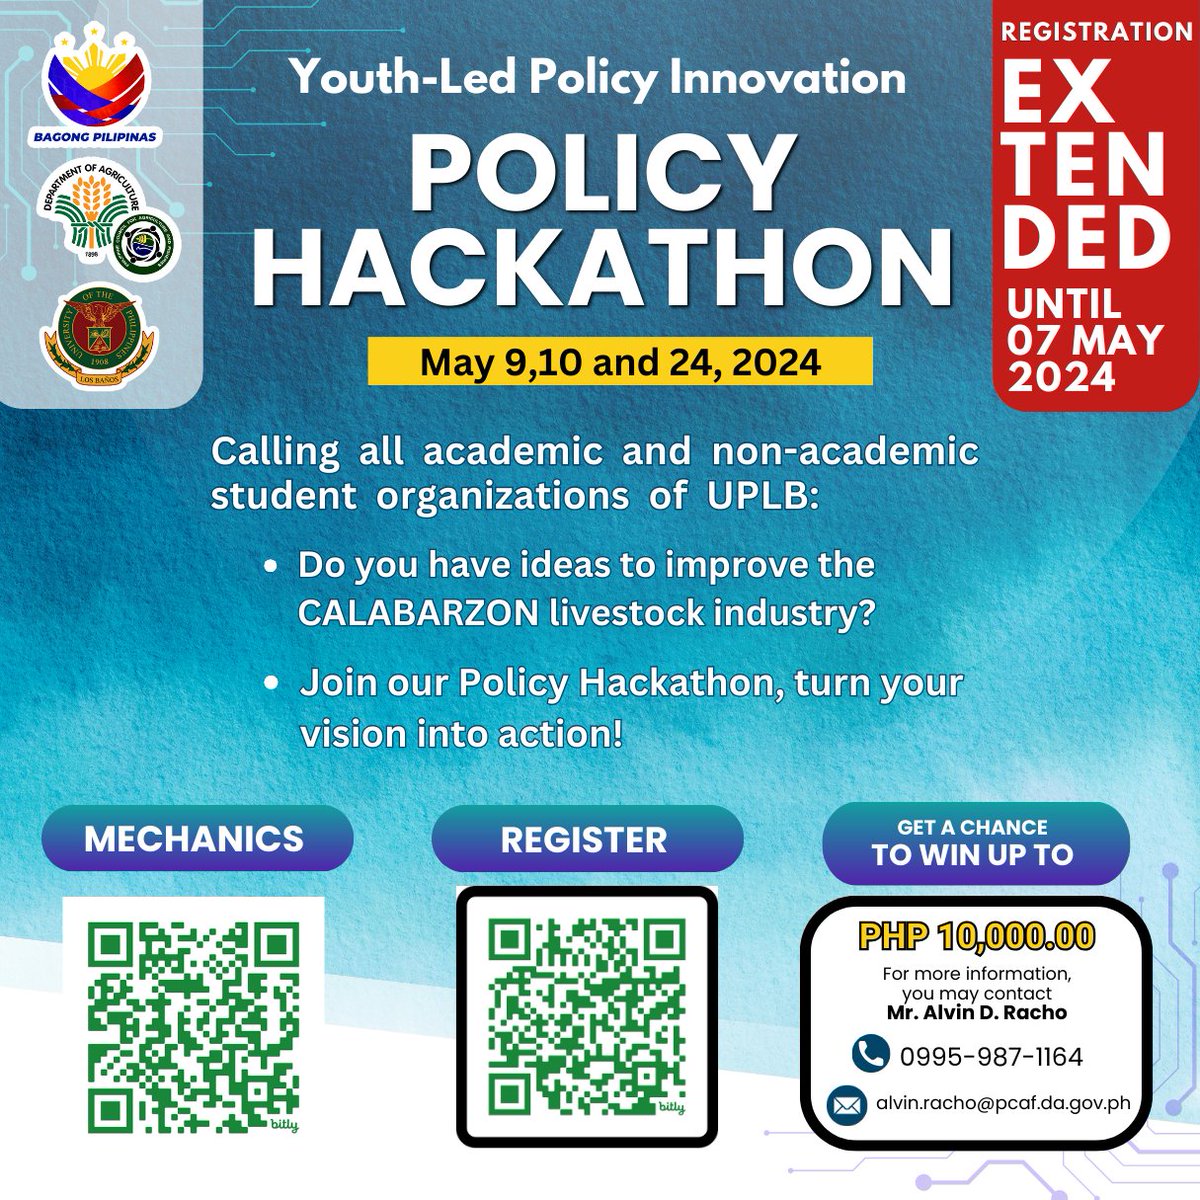 Missed the #Policy #Hackathon registration?

Worry no more! We heard you!

REGISTRATION IS EXTENDED.

Get the chance to develop innovative policy solutions, building your network & addressing challenges faced by the poultry & livestock sector.

Scan the QR code for more info!